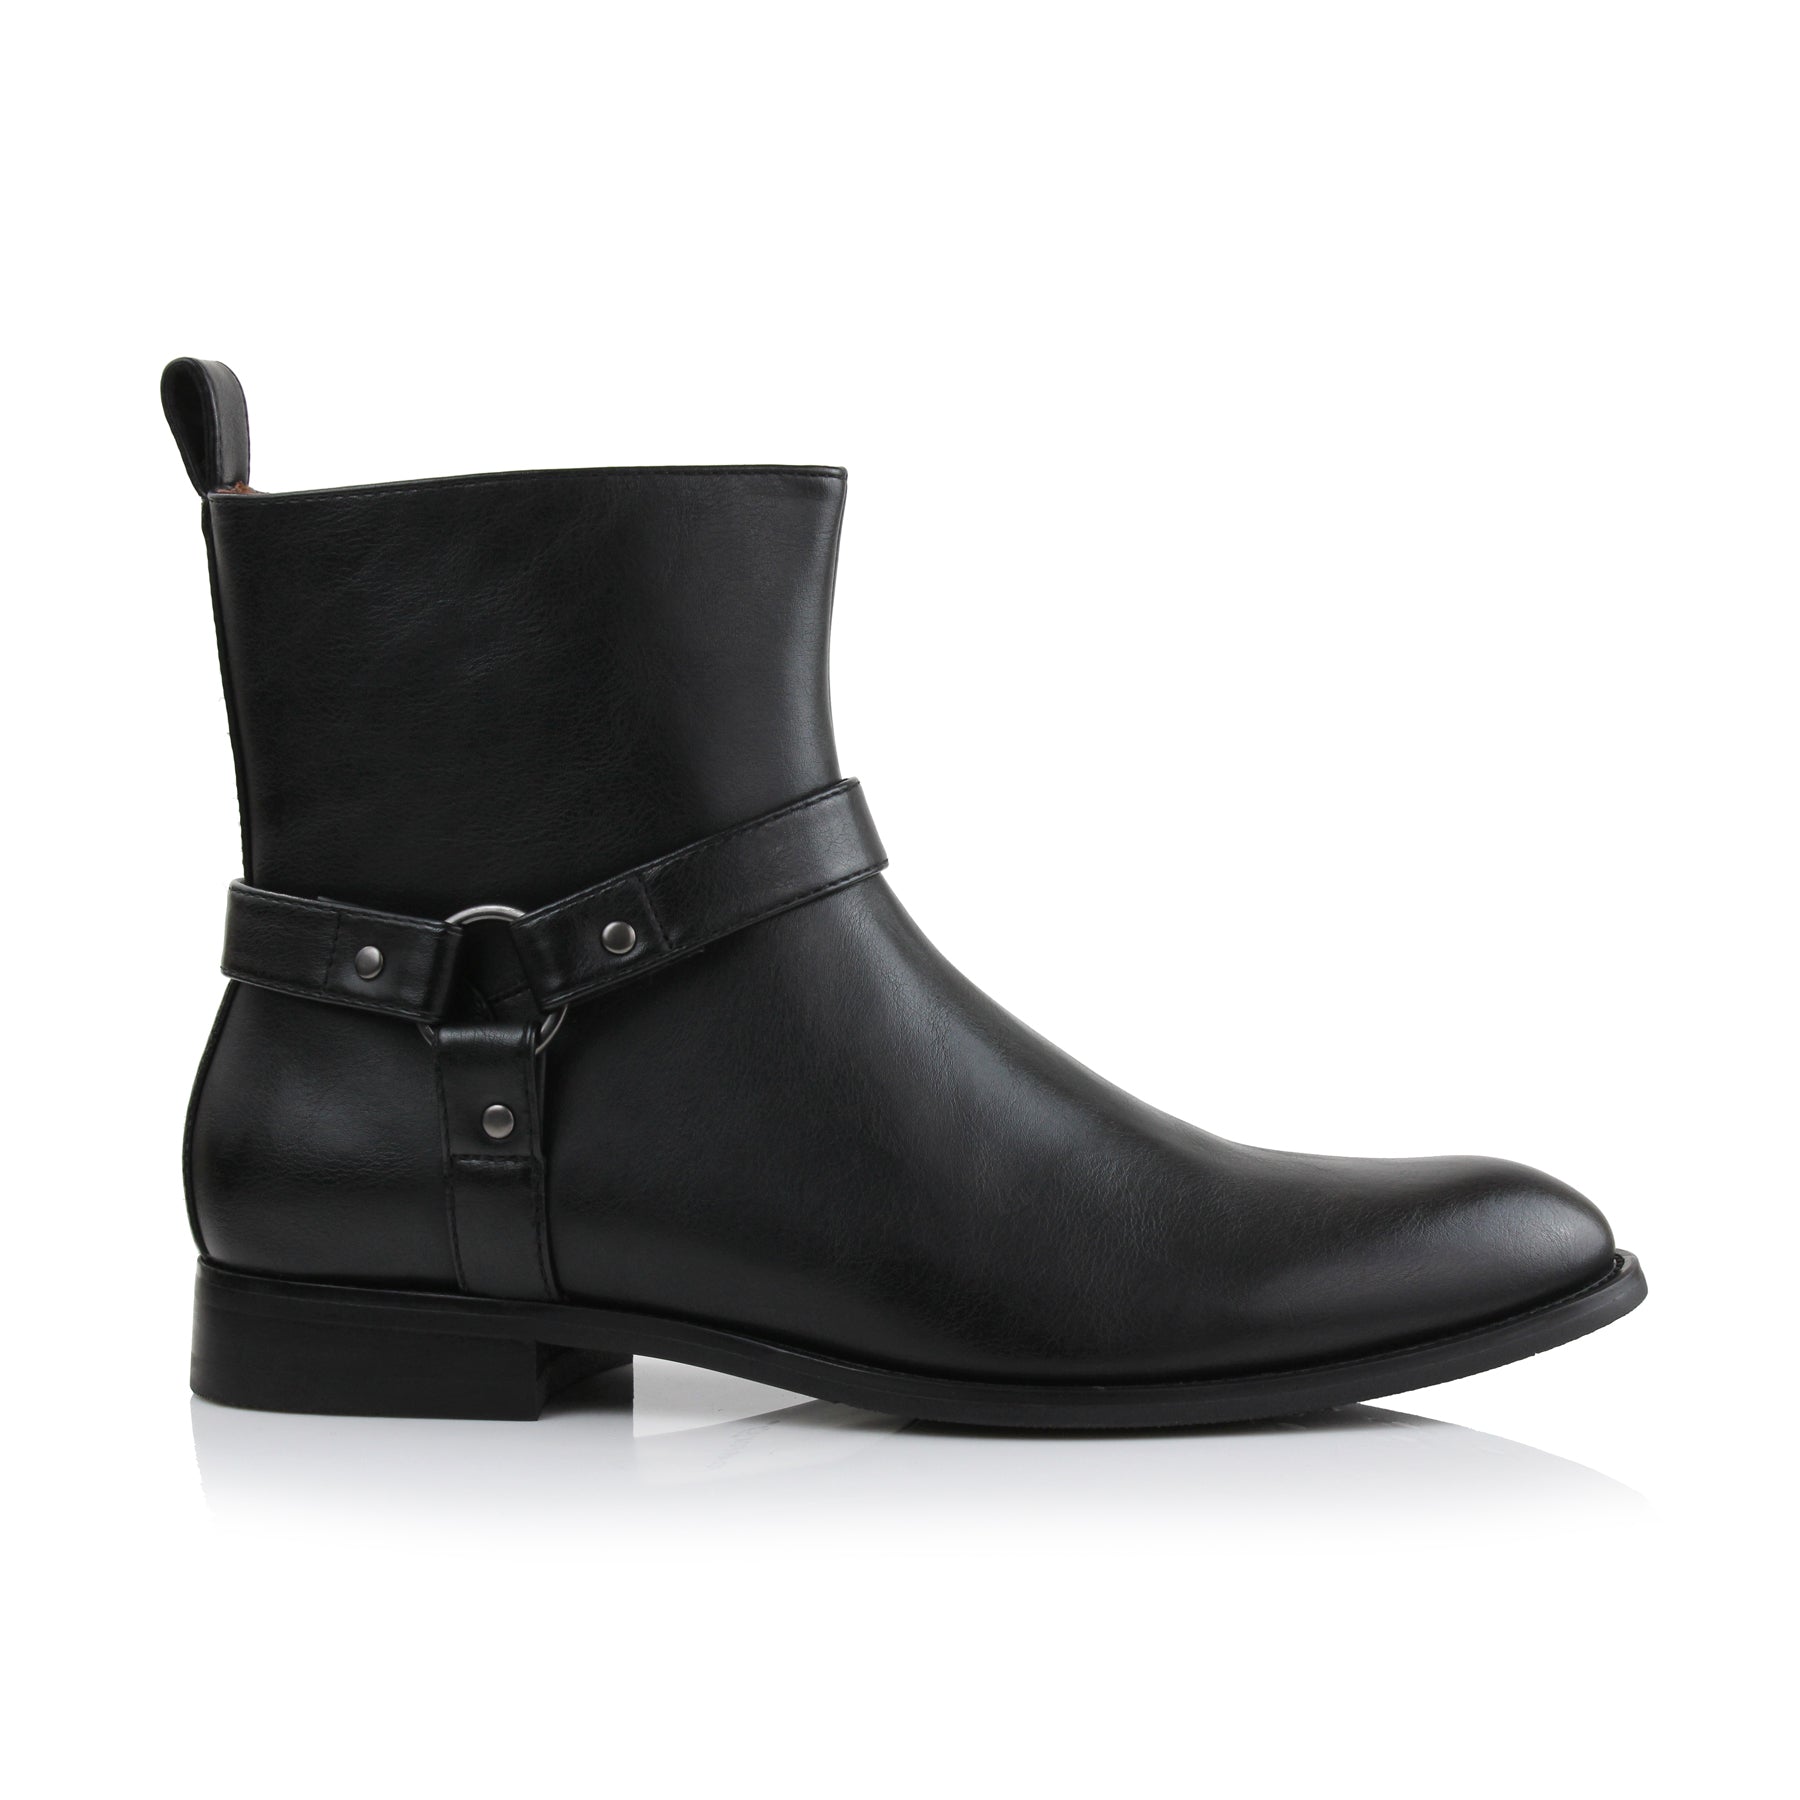 Modern Western Ankle Boots | Rhett by Polar Fox | Conal Footwear | Outer Side Angle View